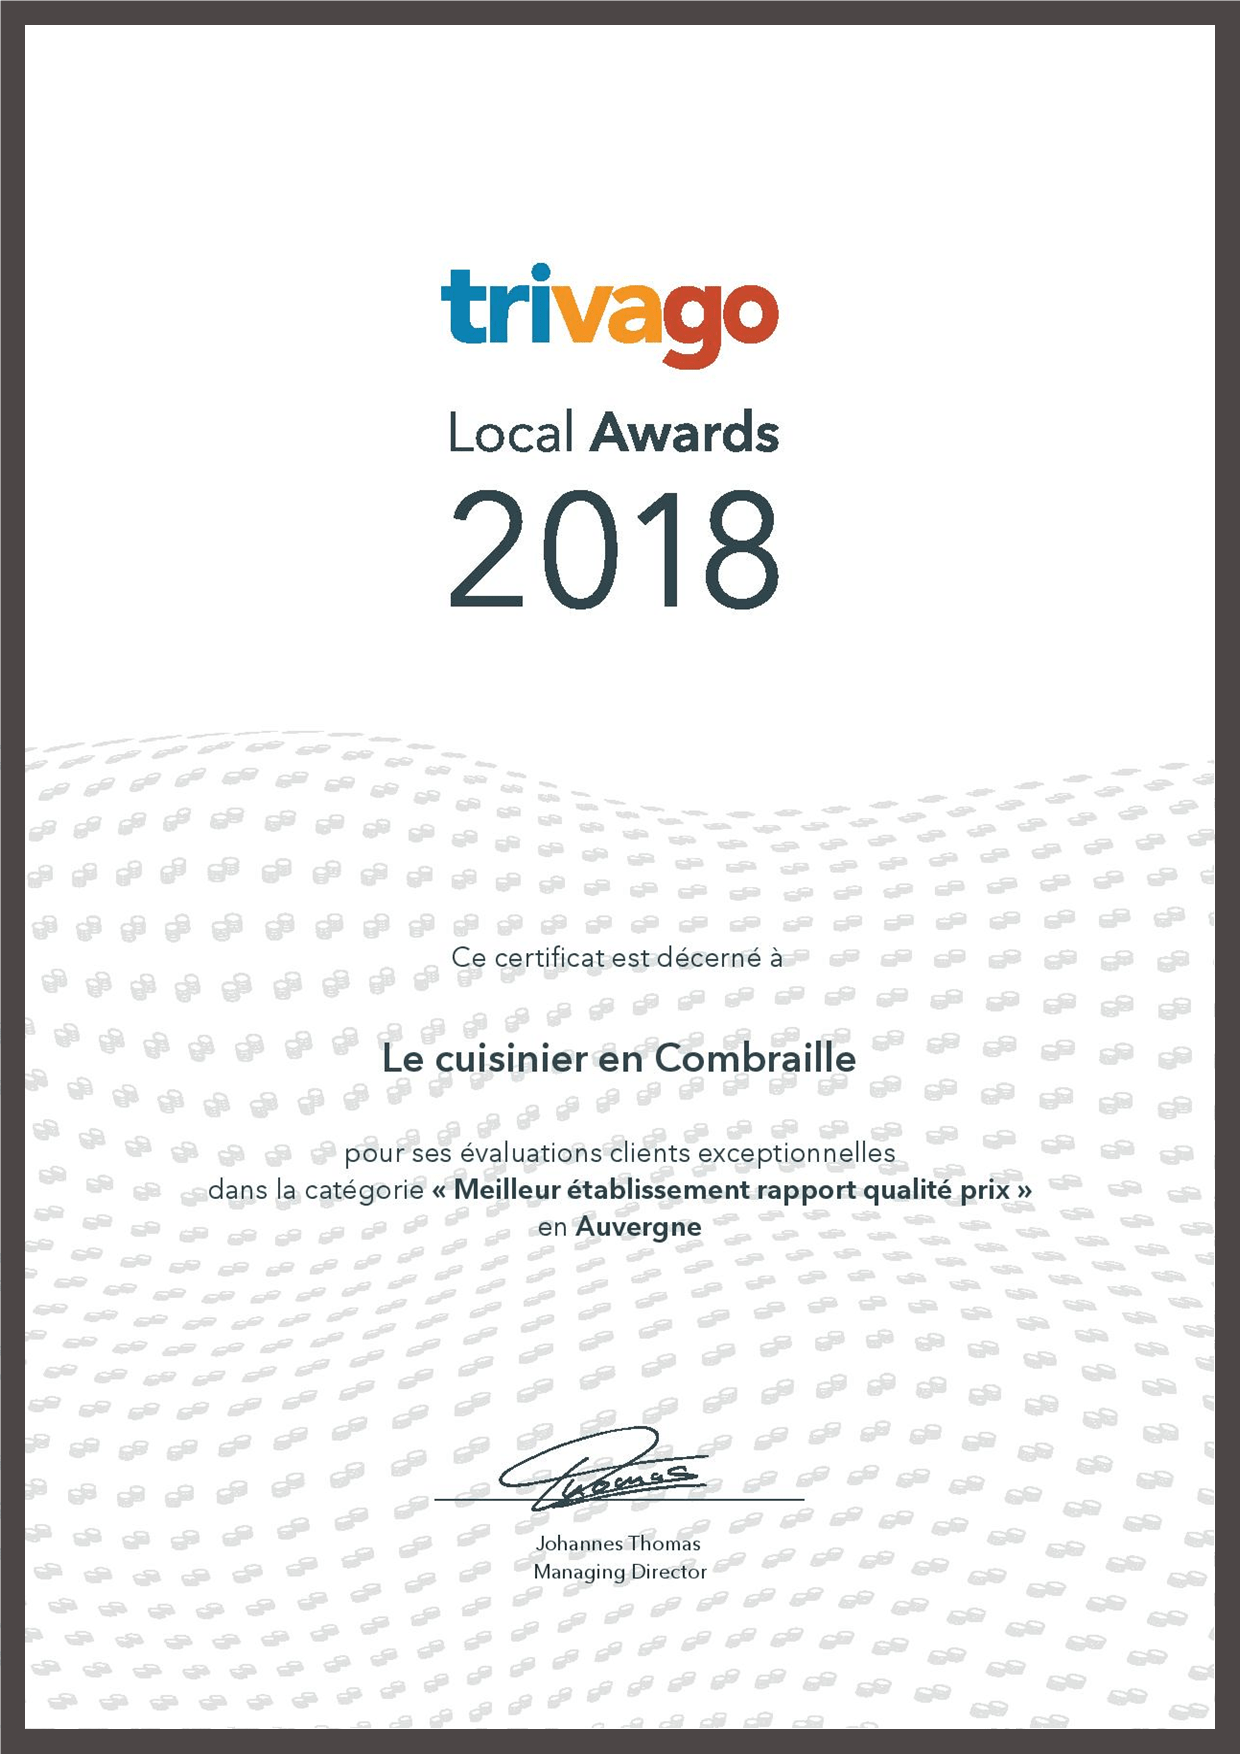 trivago Value for Money Certificate